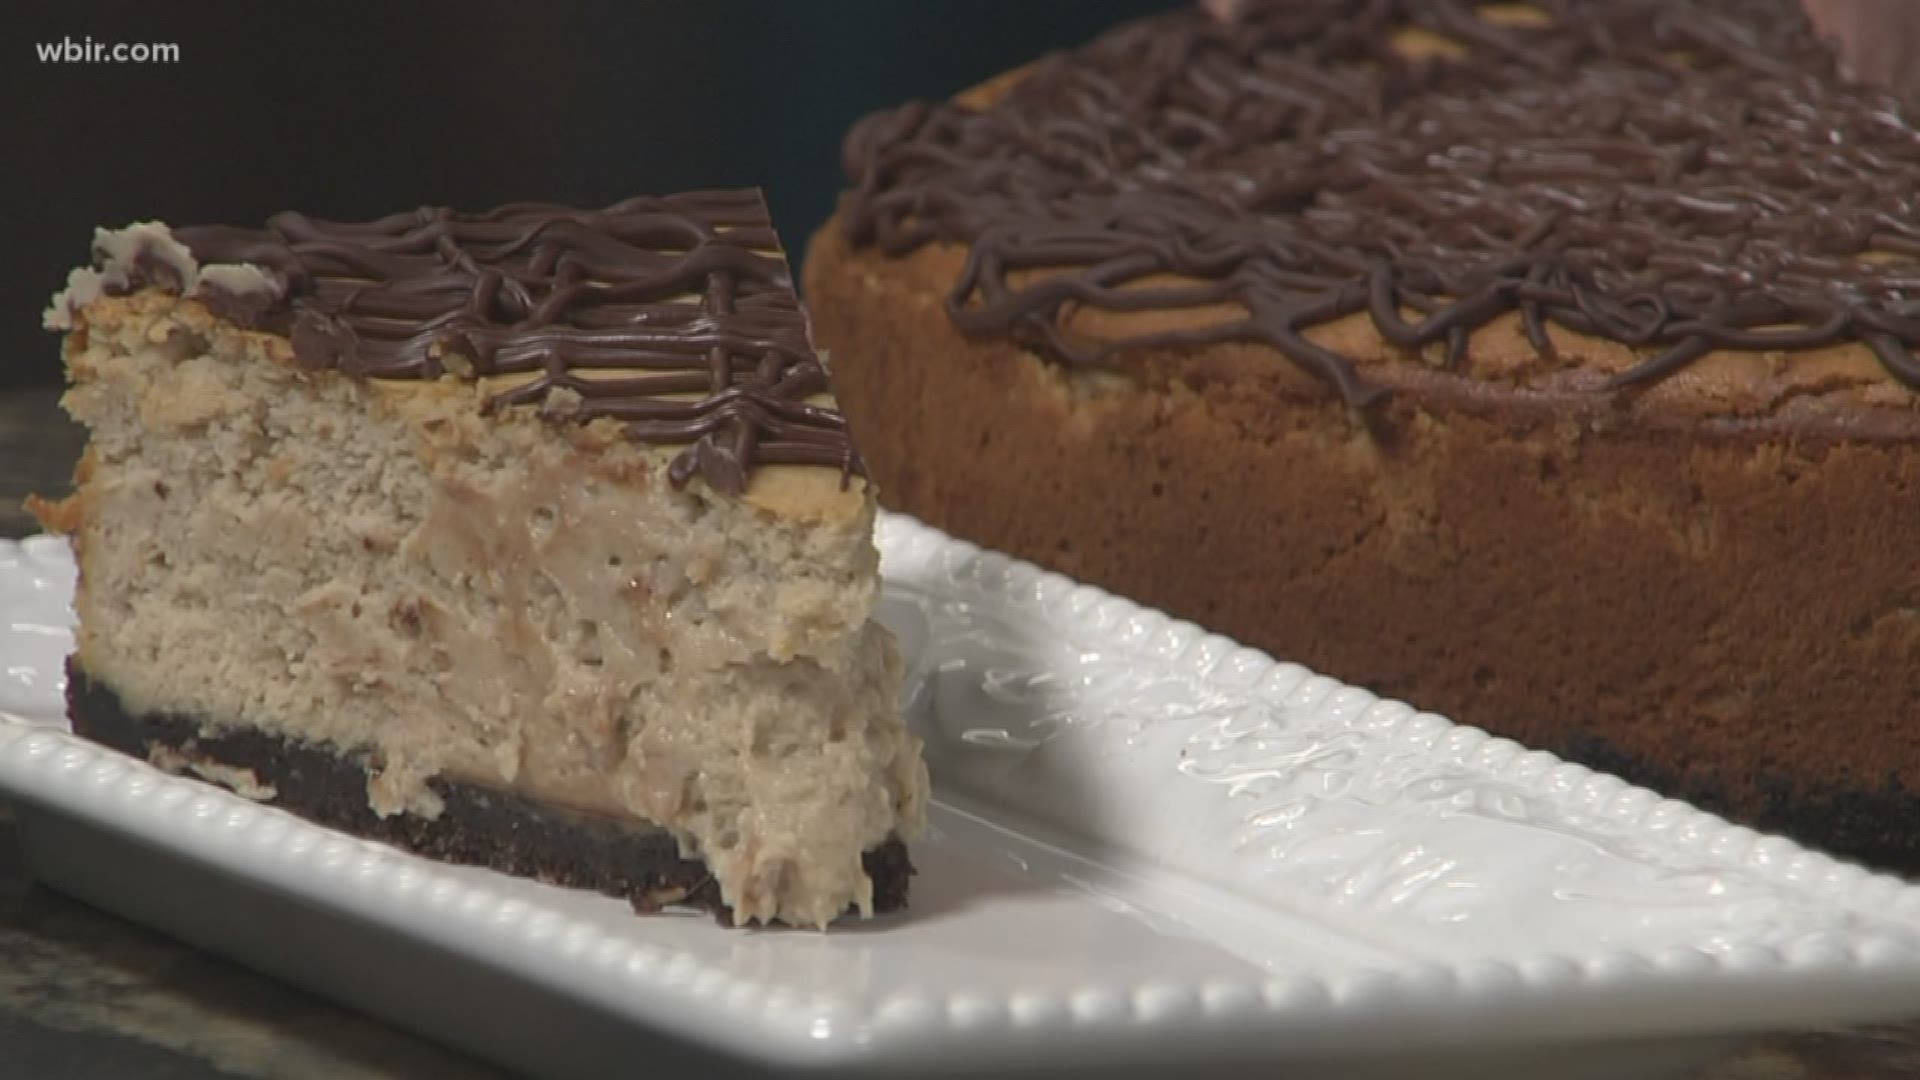 Betty Henry with B&G All Occasion Catering shows you how to whip up a delicious and creamy cheesecake.